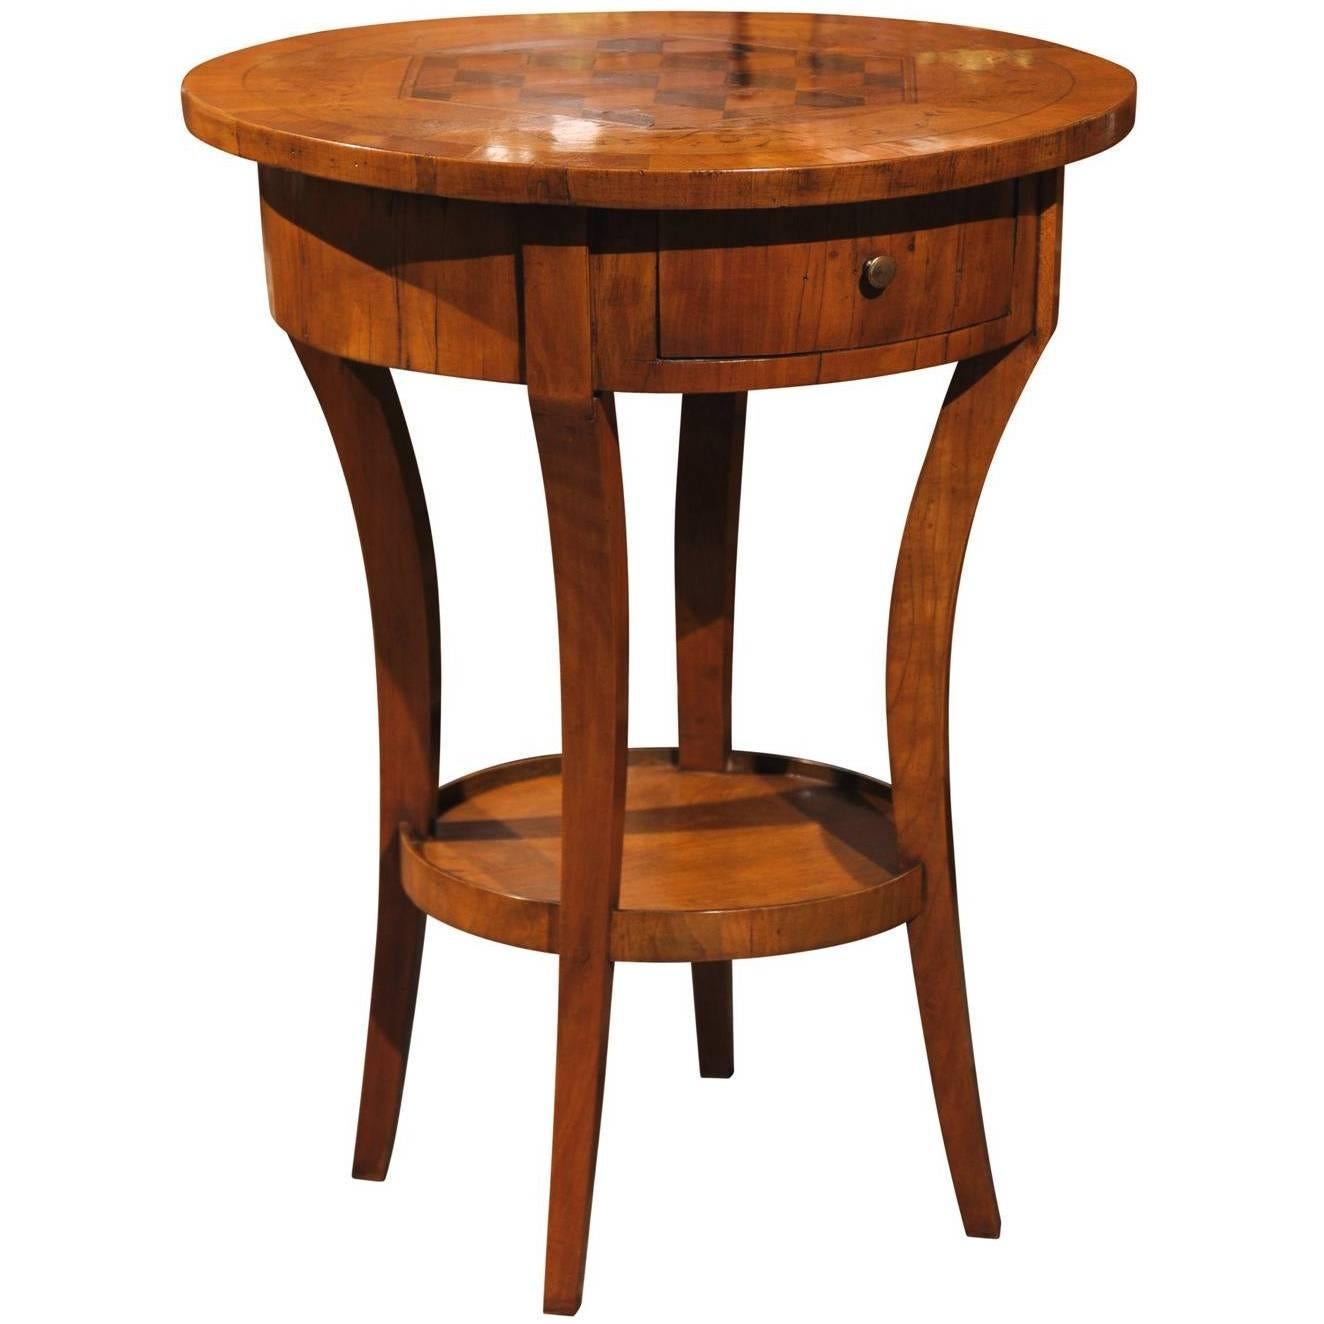 Italian Round Side Table with Cube Parquetry Inlay from the Early 19th Century